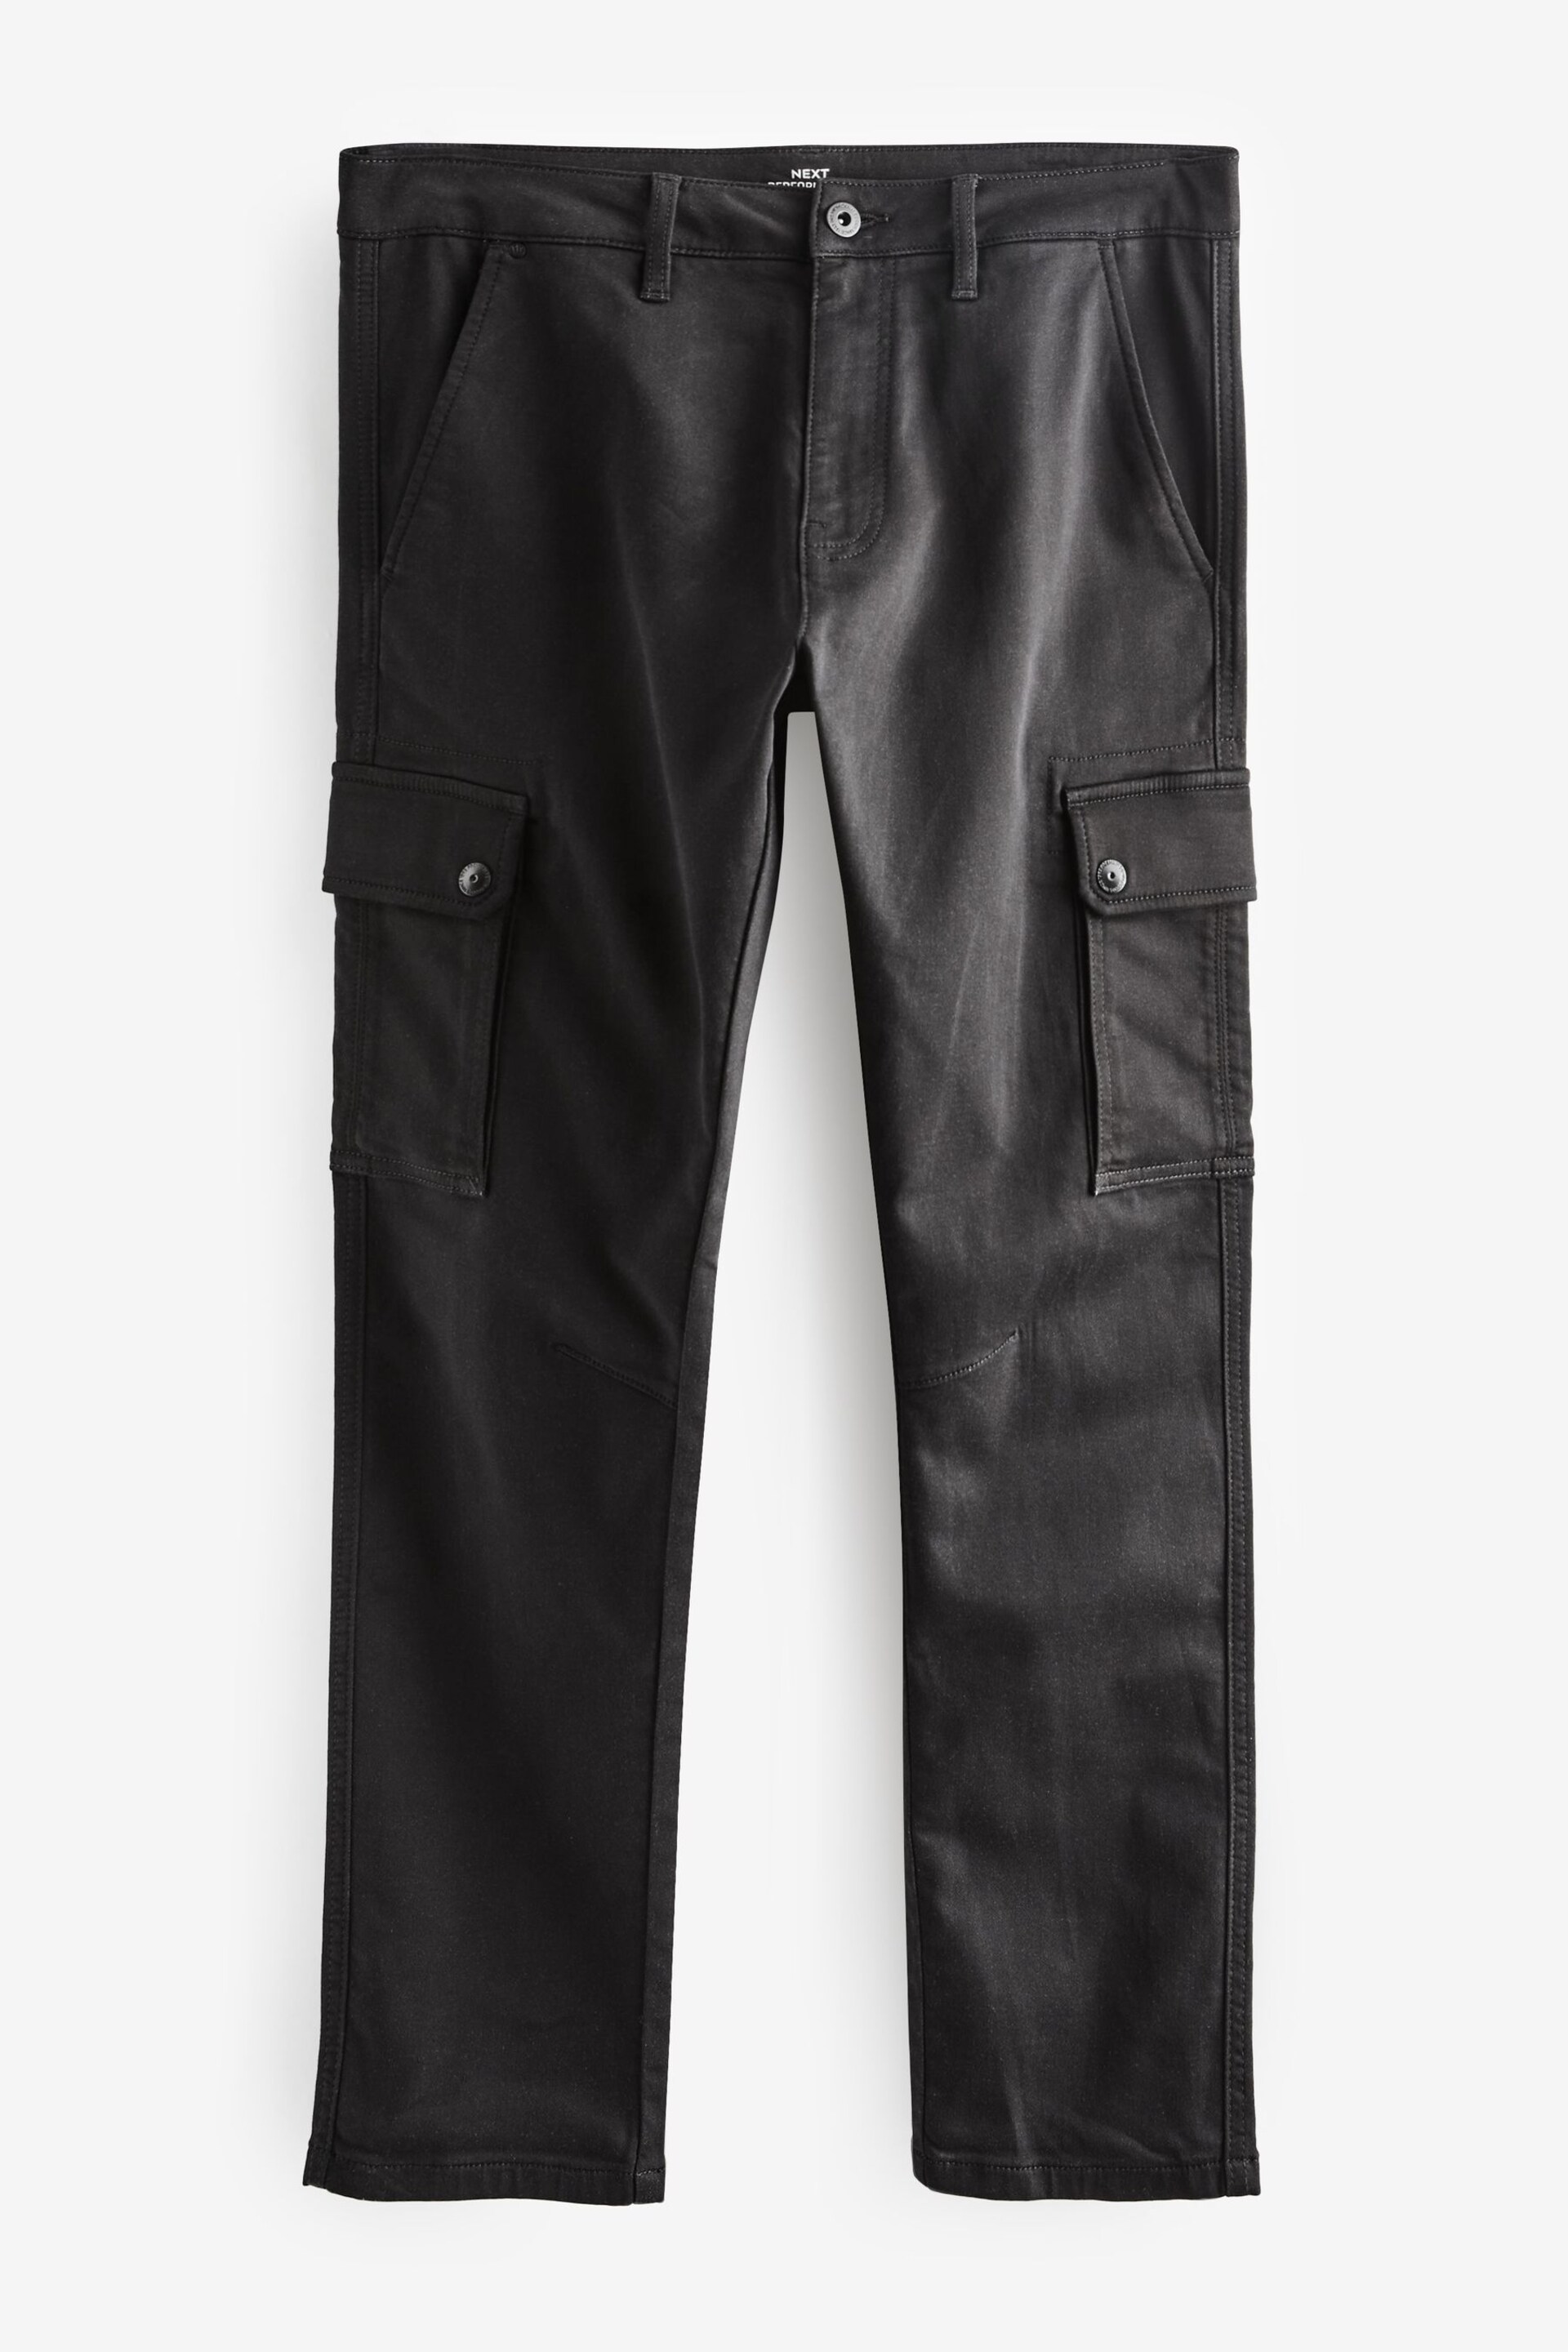 Black Motionflex Cargo Trousers - Image 8 of 10